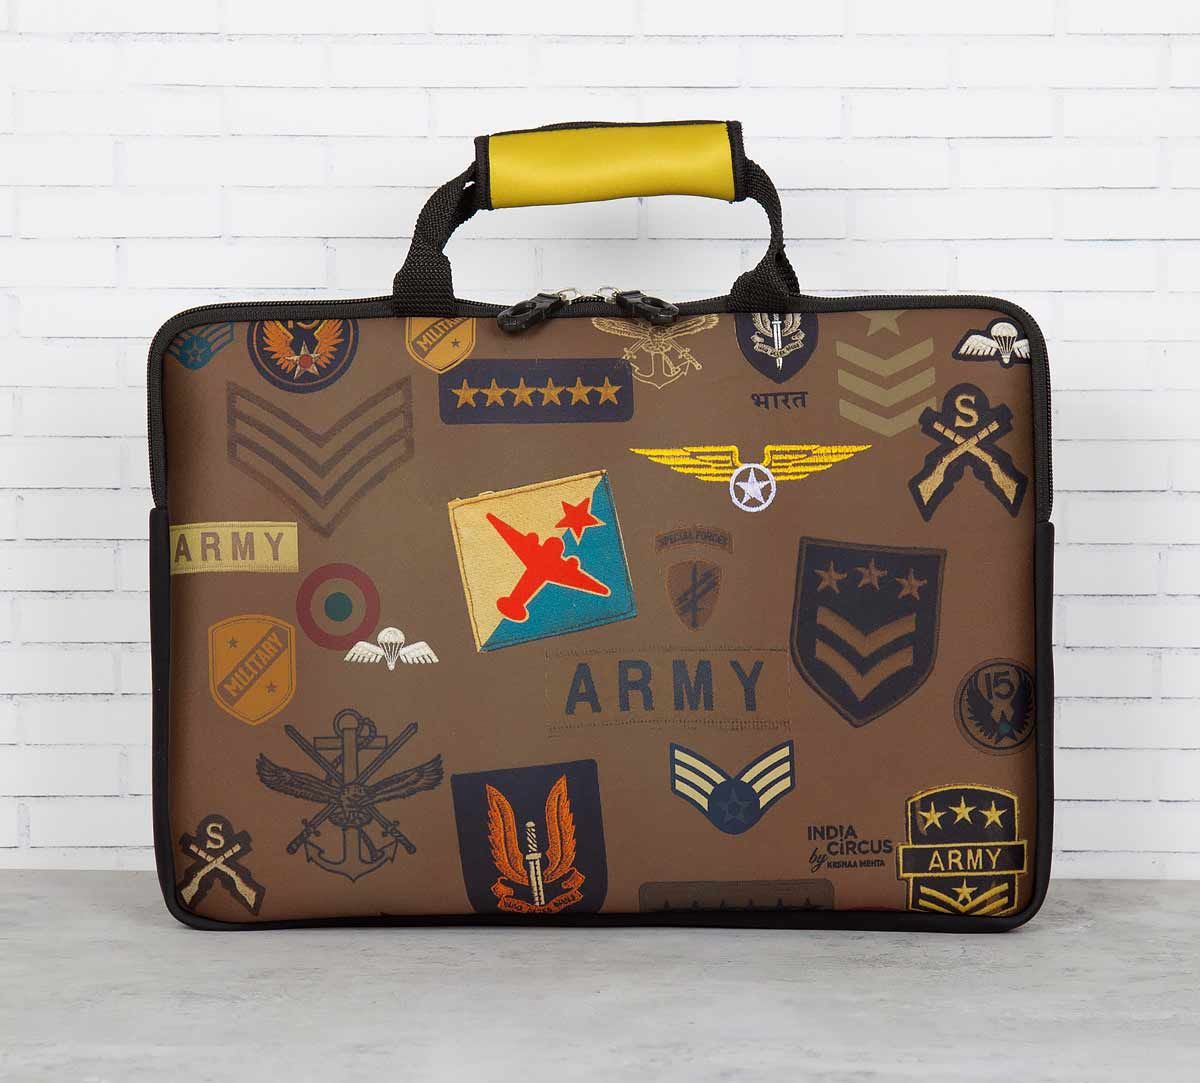 India Circus Army Badges Rush Laptop Sleeve and Bag